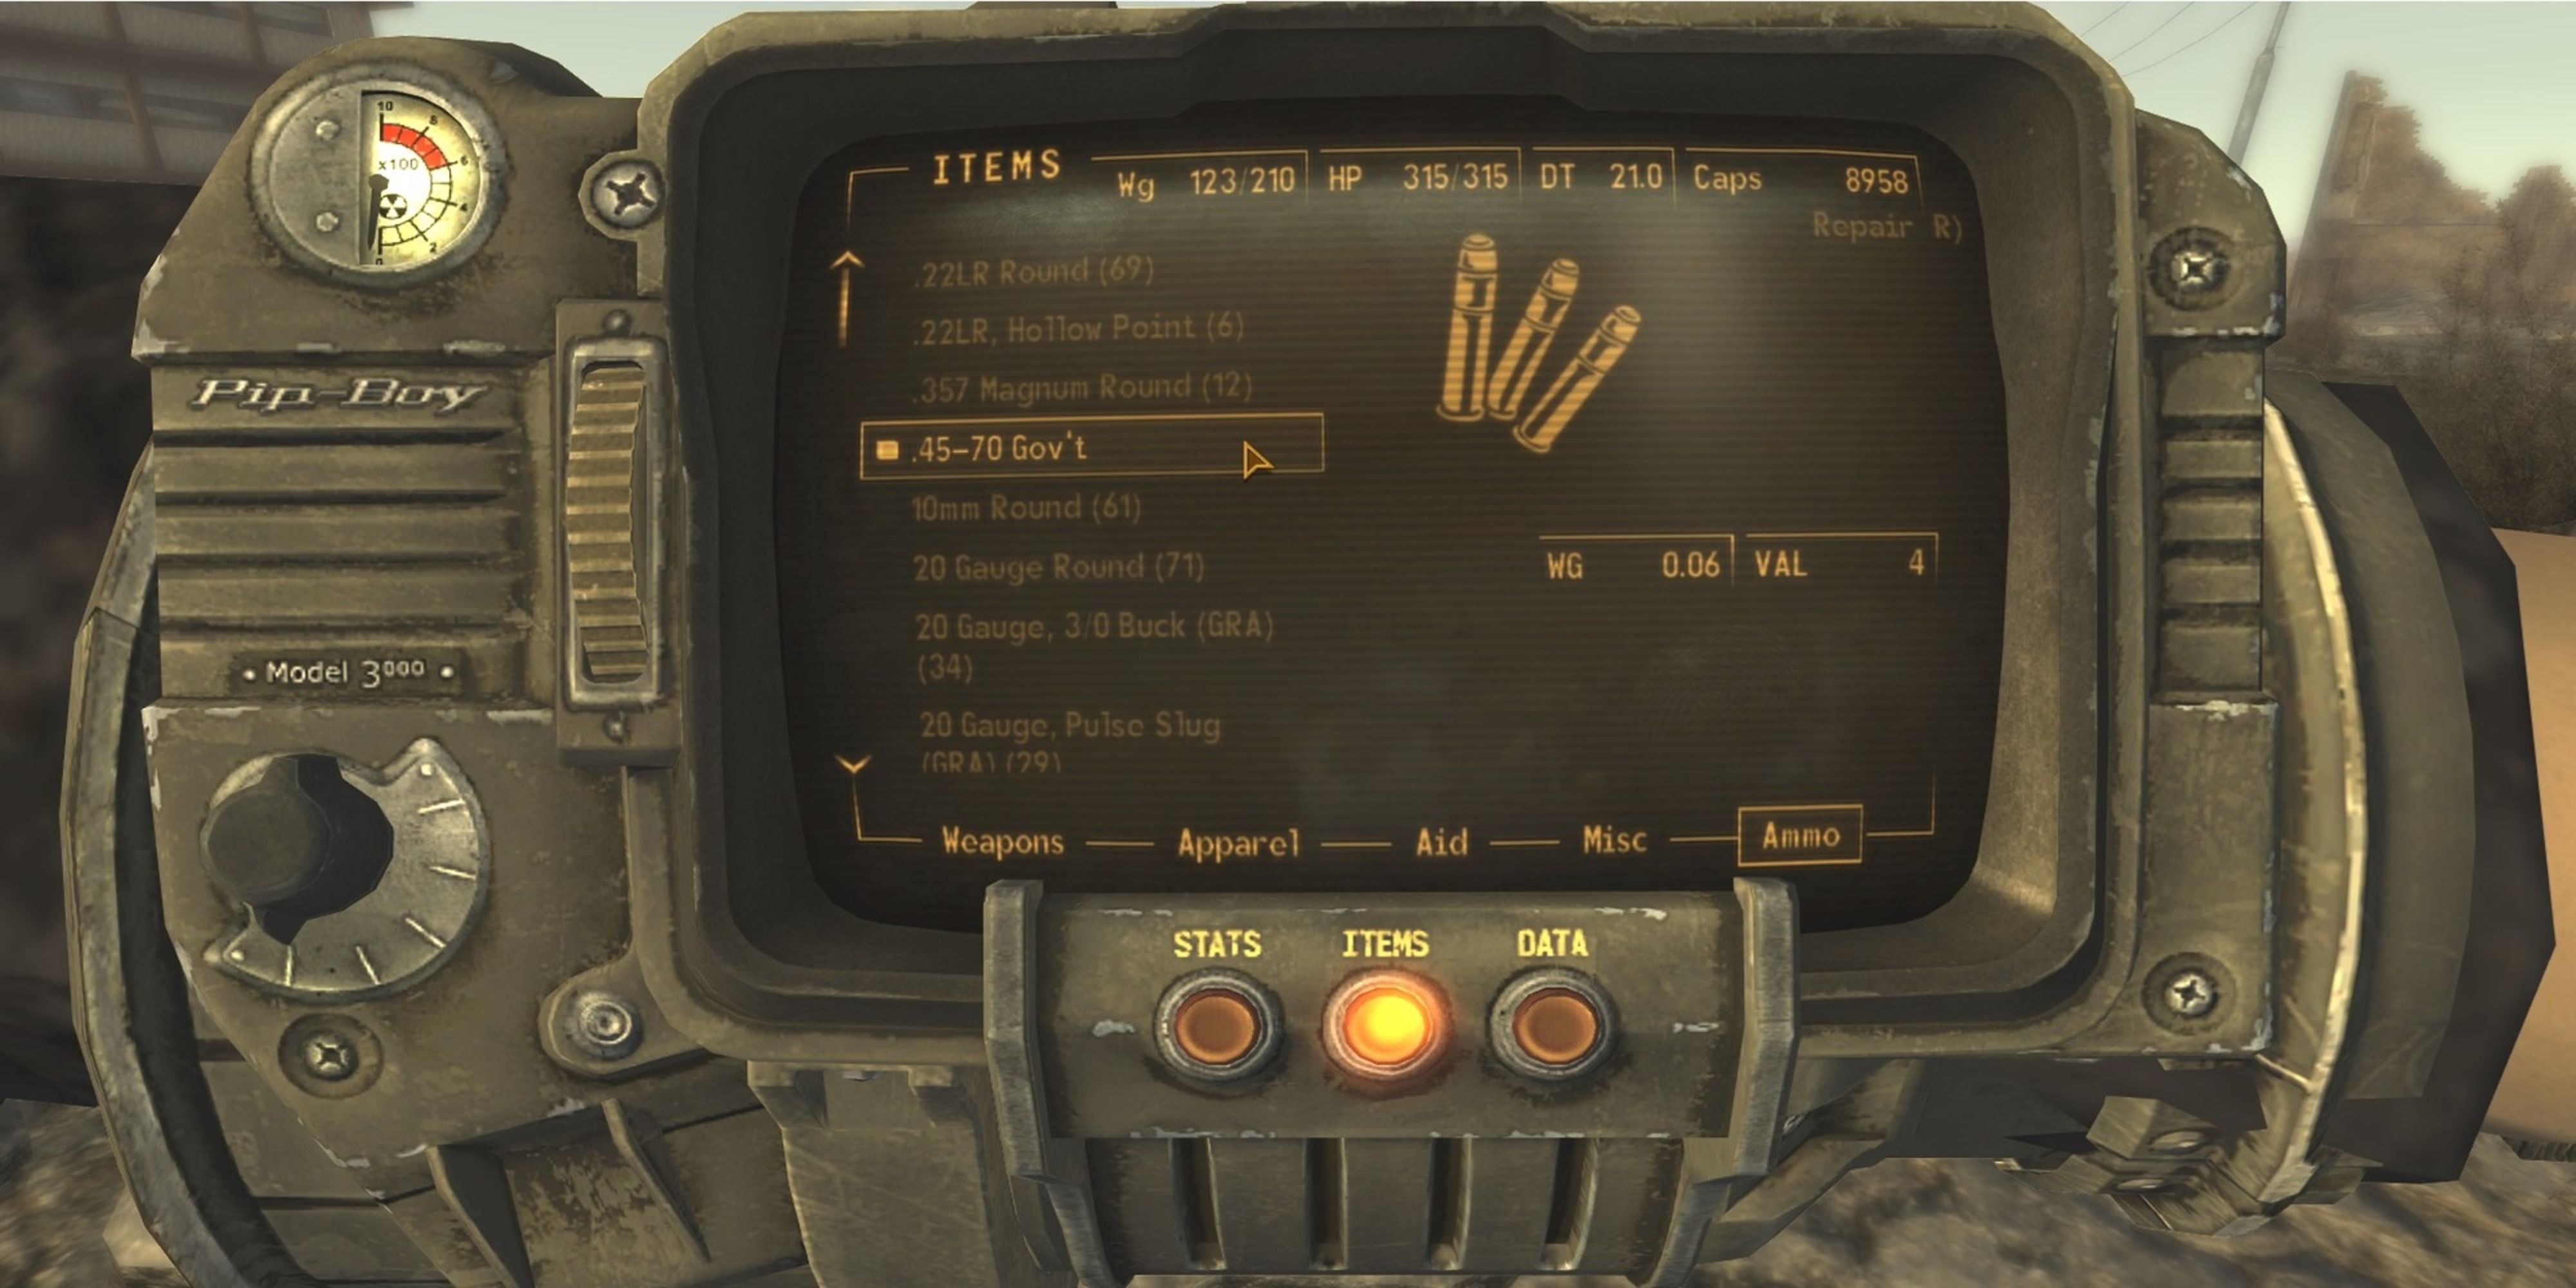 Looking at the Ammo section in the Pip-Boy for .45-70 Gov't Ammo in Fallout 76